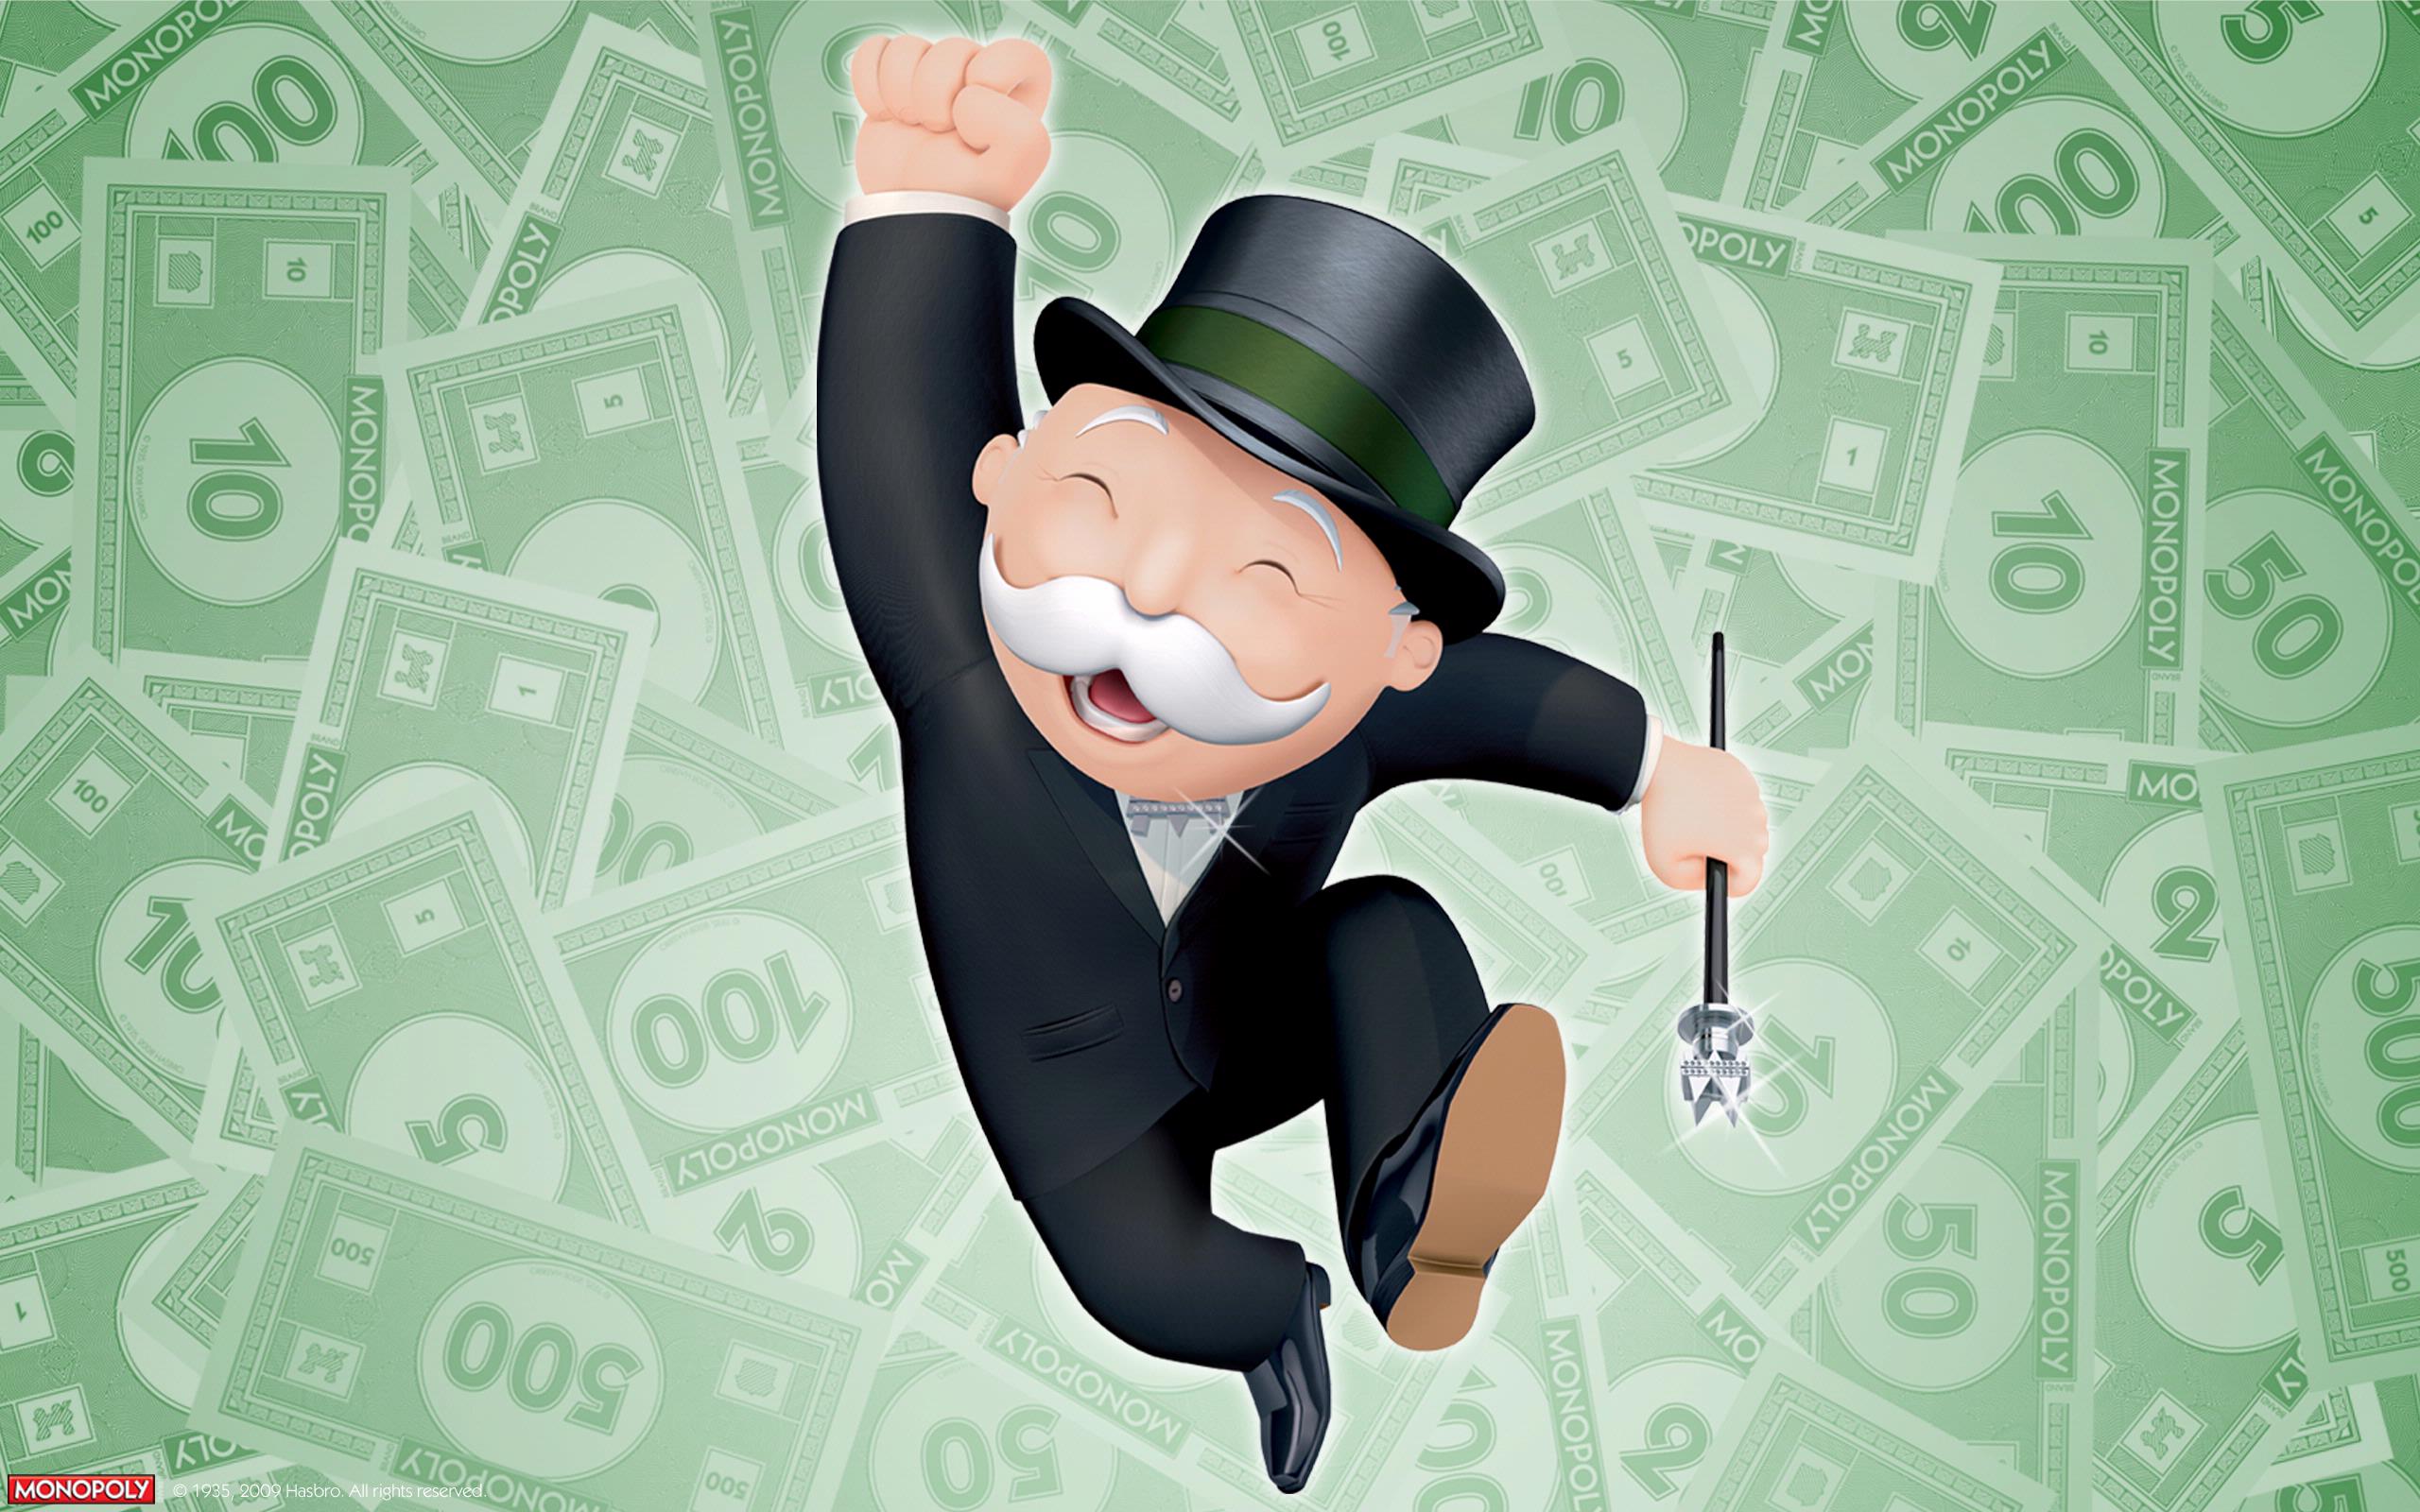 Monopoly Man Wallpapers  Wallpaper Cave